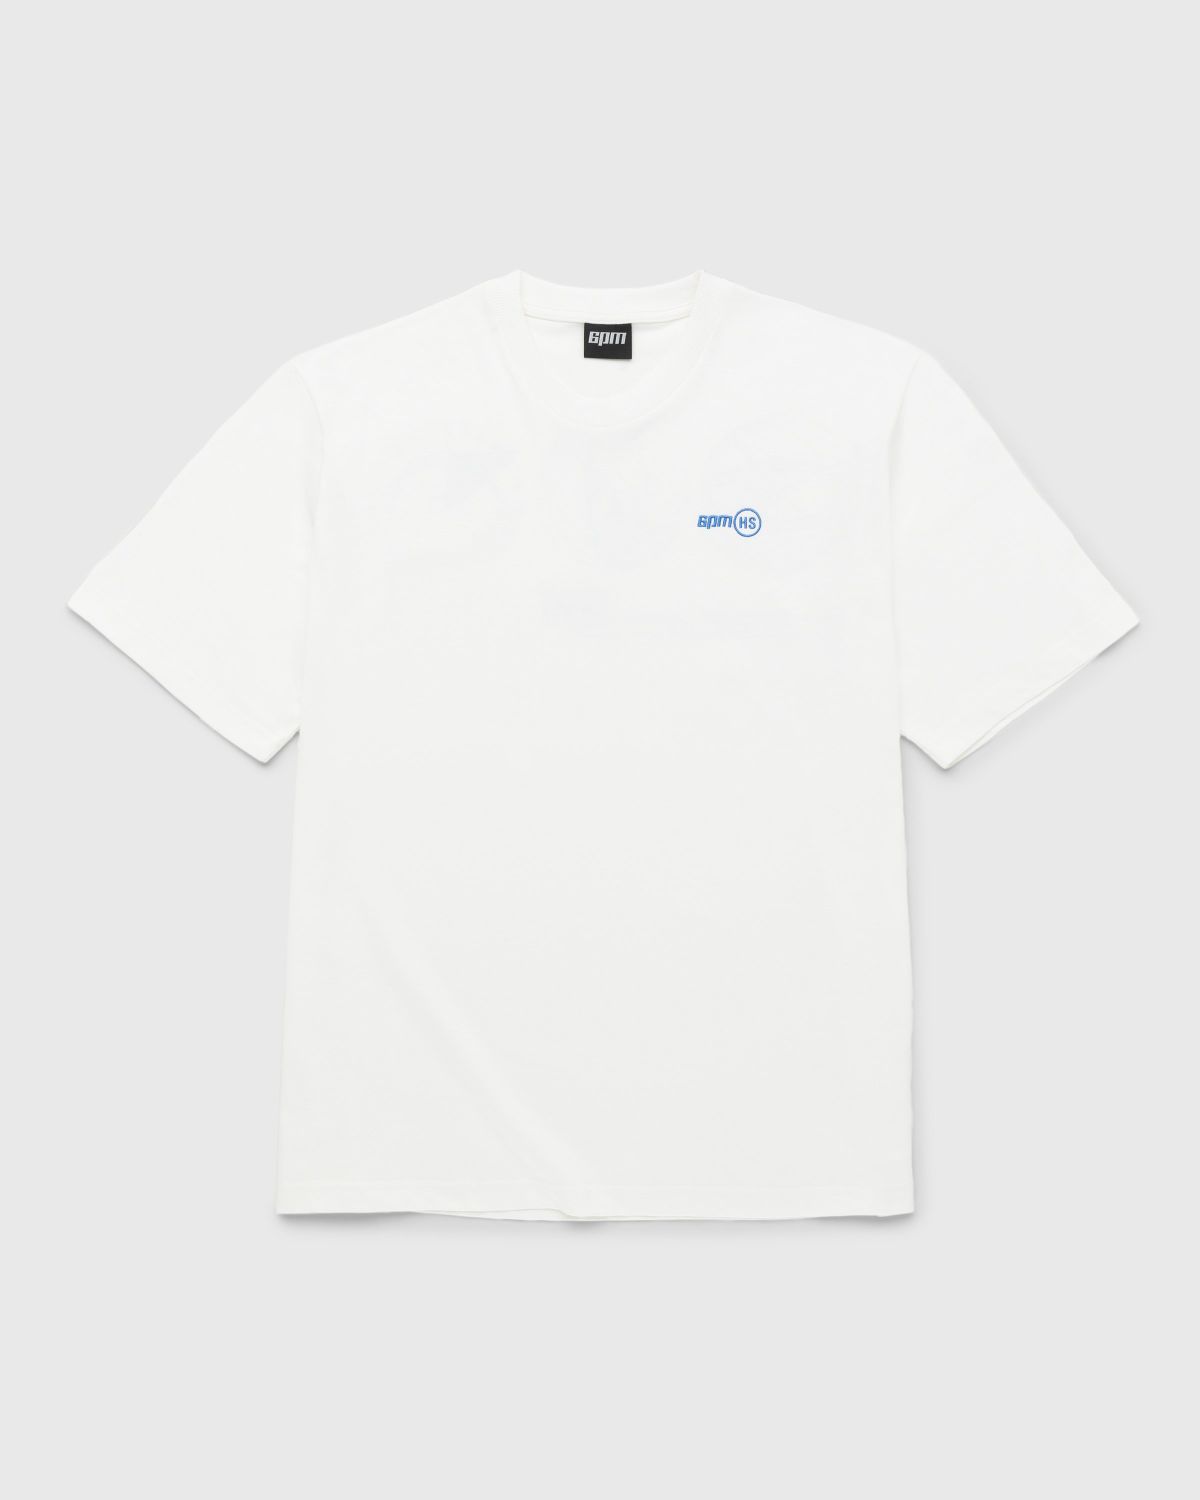 6PM x Highsnobiety – BERLIN, BERLIN 3 Only Wear After 6PM T-Shirt White - T-shirts - White - Image 2